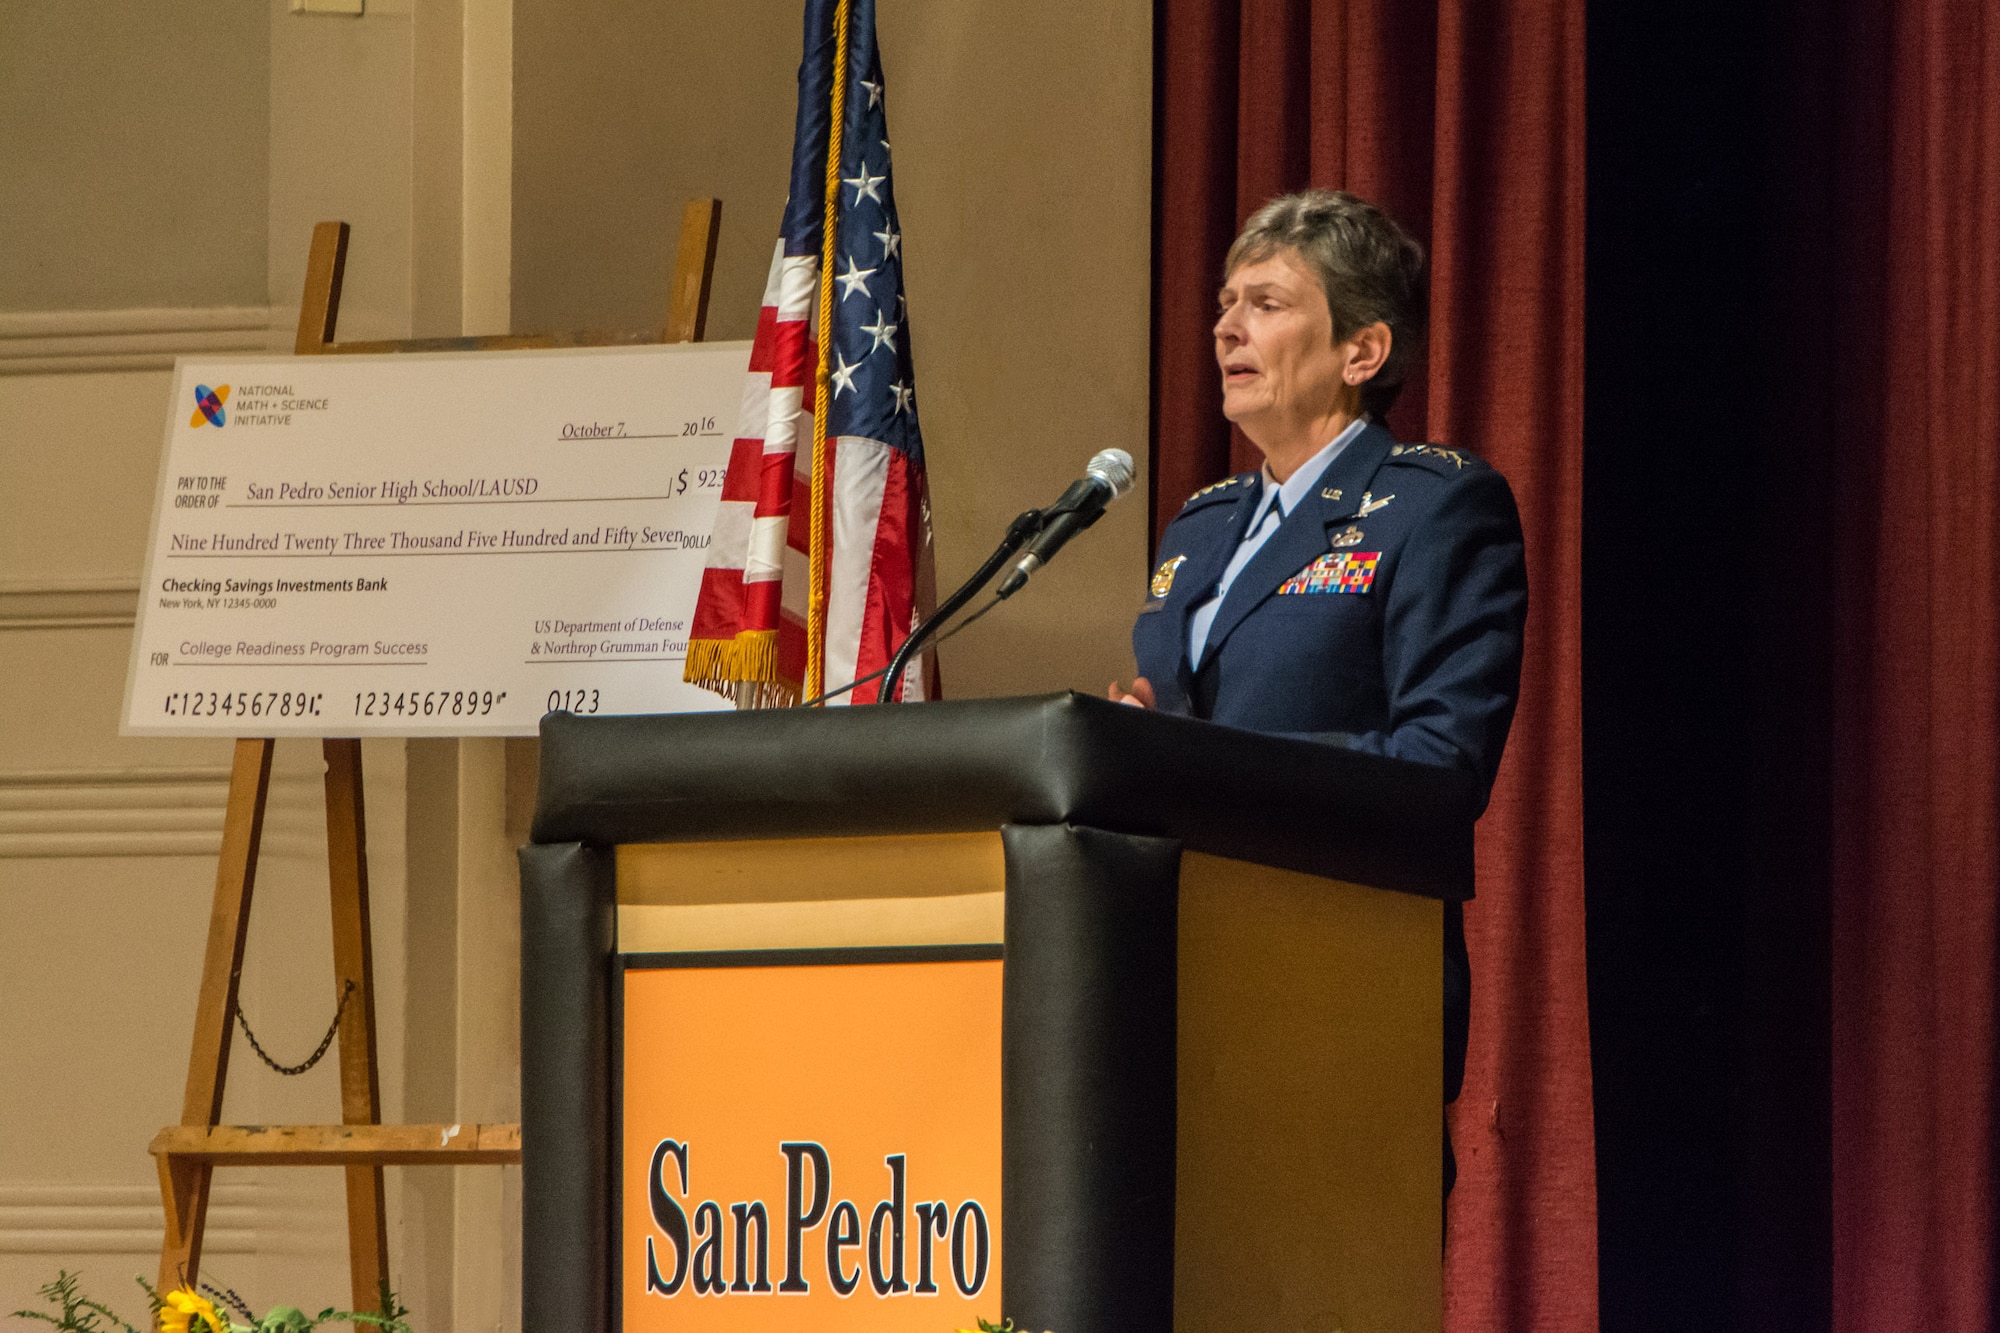 Air Force Materiel Command Commander Gen. Ellen M. Pawlikowski speaks to students at San Pedro High School Oct. 7, 2016, during the school's kickoff of the National Math and Science College Readiness Program. The general visited the school as part of the program's launch, which focuses on science, technology, engineering and mathematics classes. (Courtesy photo)



